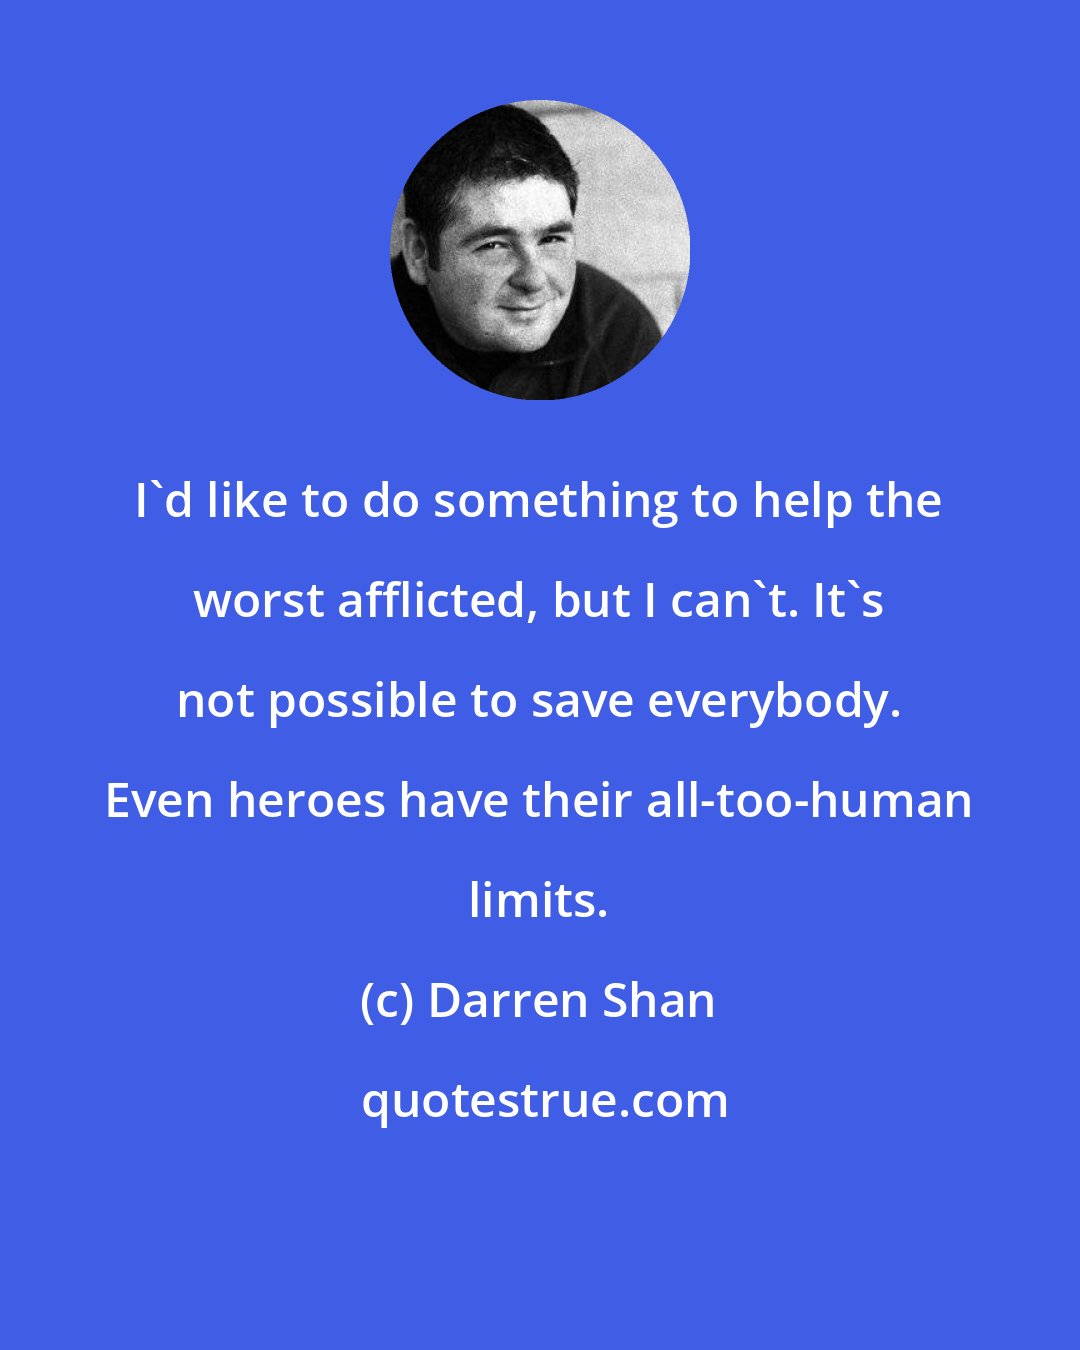 Darren Shan: I'd like to do something to help the worst afflicted, but I can't. It's not possible to save everybody. Even heroes have their all-too-human limits.